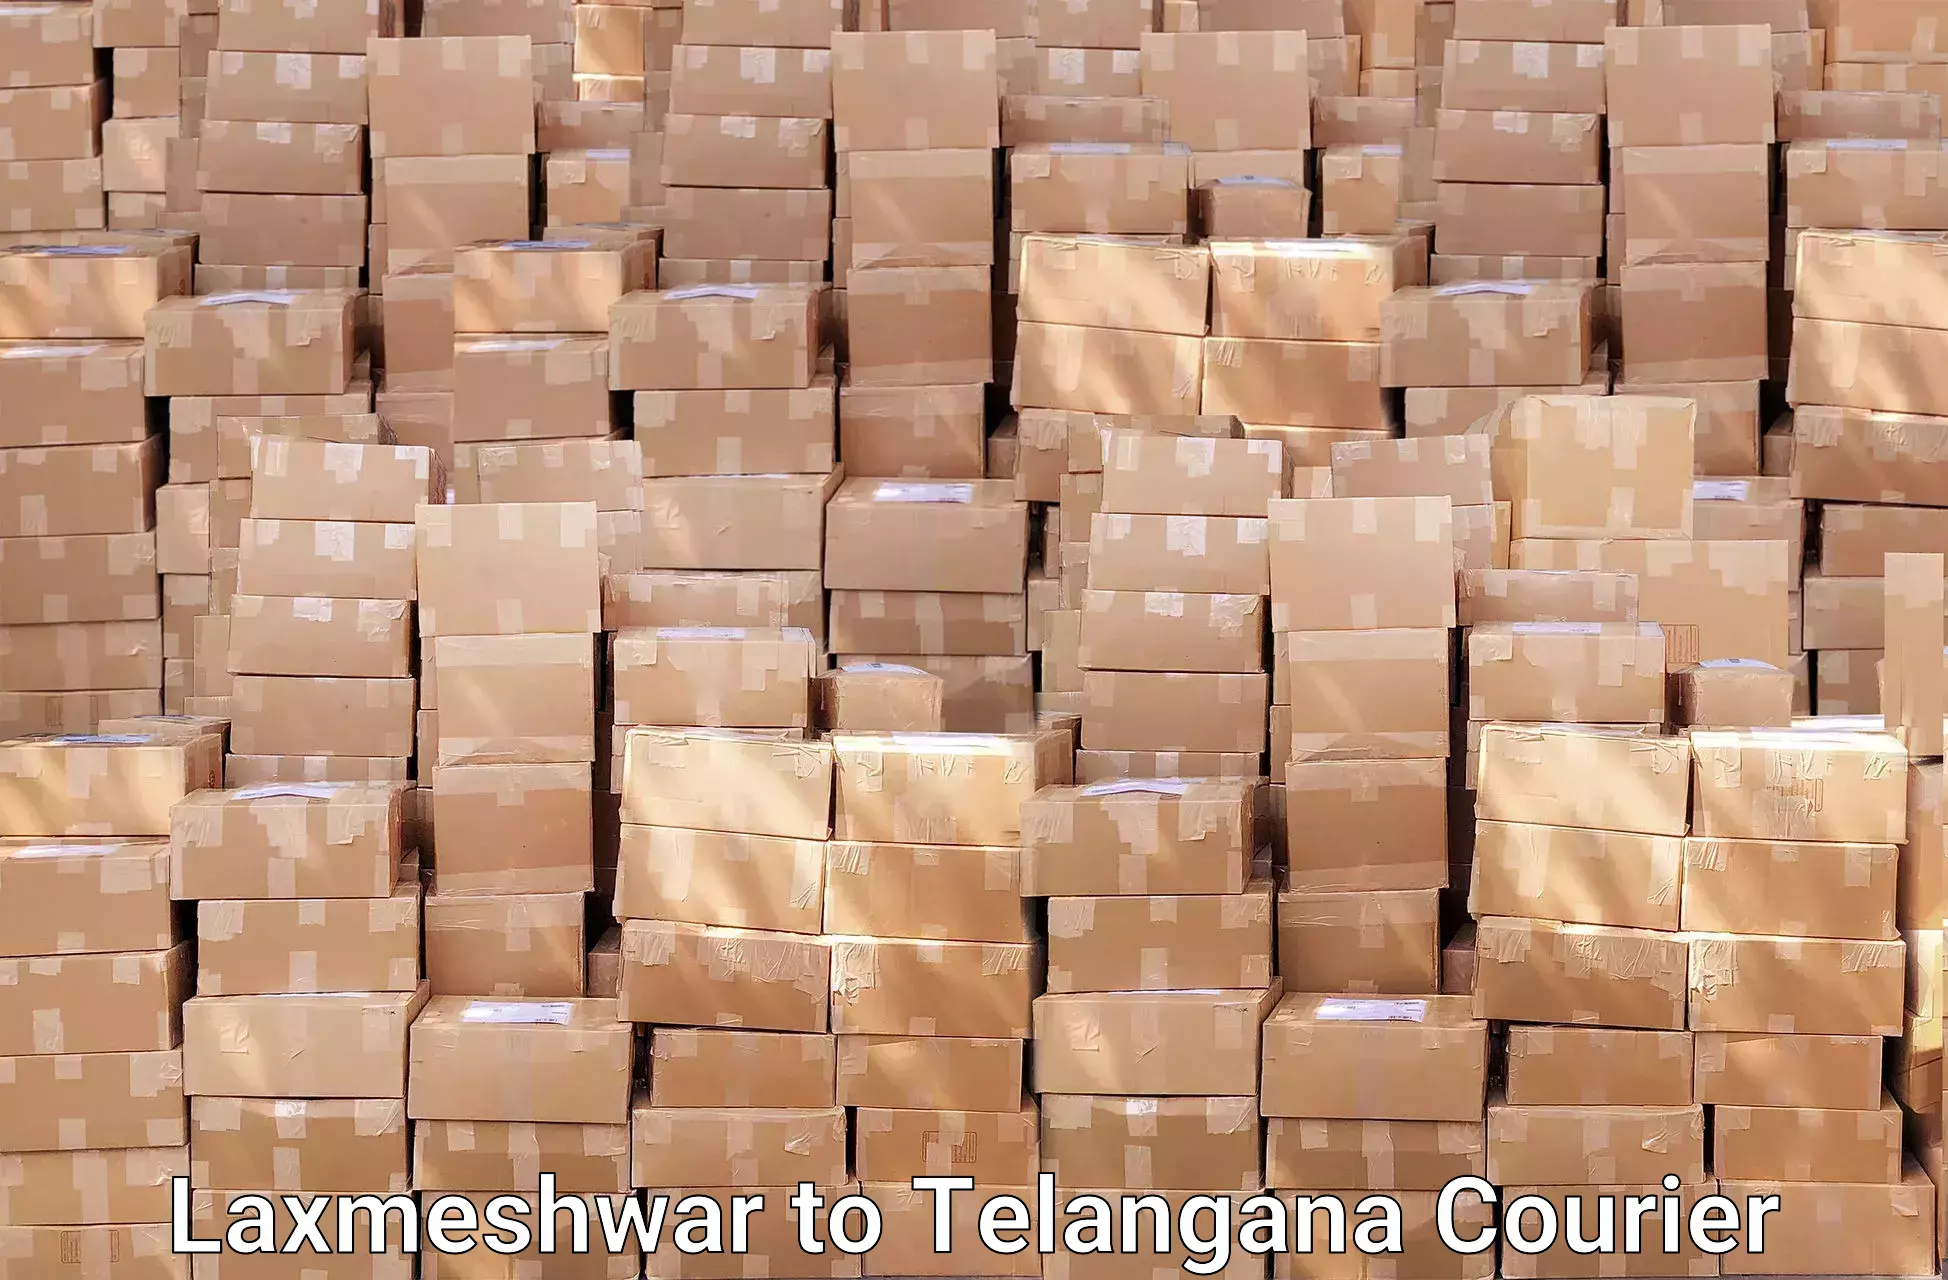 Moving and storage services in Laxmeshwar to Veenavanka